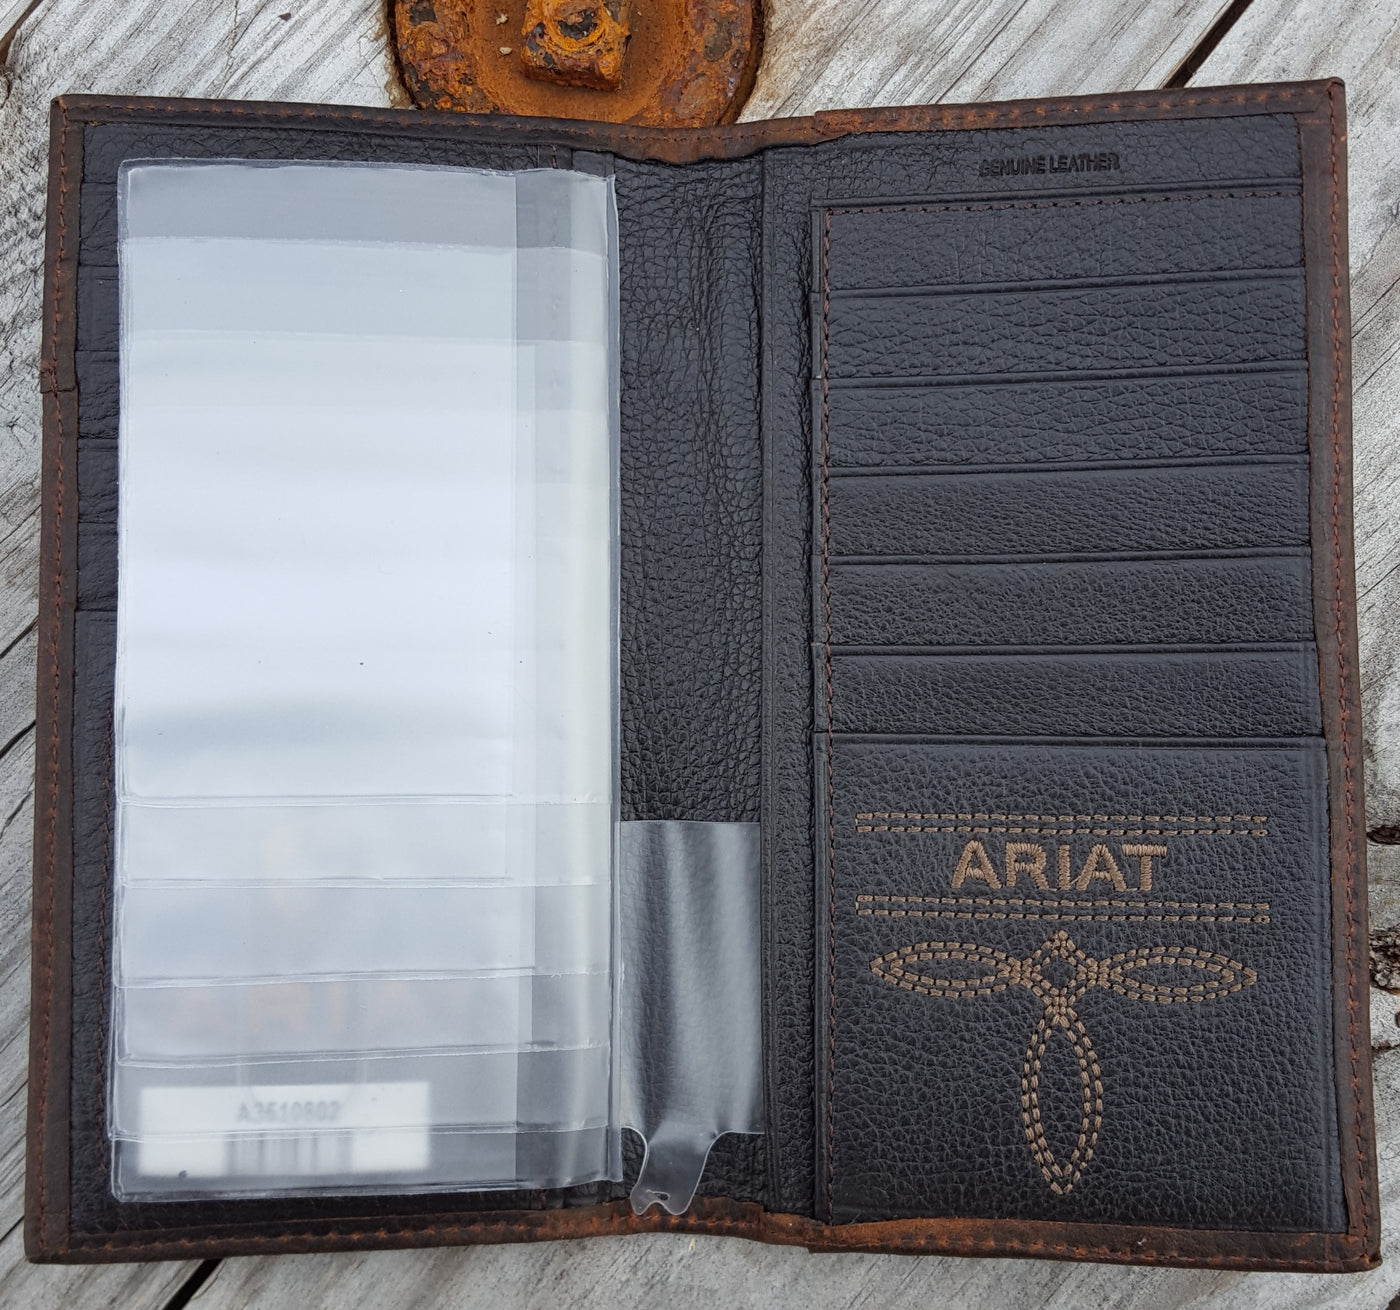 Inside right view of Ariat Work Rodeo Wallet-Ariat Leather Rodeo Wallet Oil tanned dark copper leather, and Ariat brand concho. Inside features a clear ID slot, 12 credit card slots, removable photo slip, and money slot. Folded dimensions are 7" by 3"